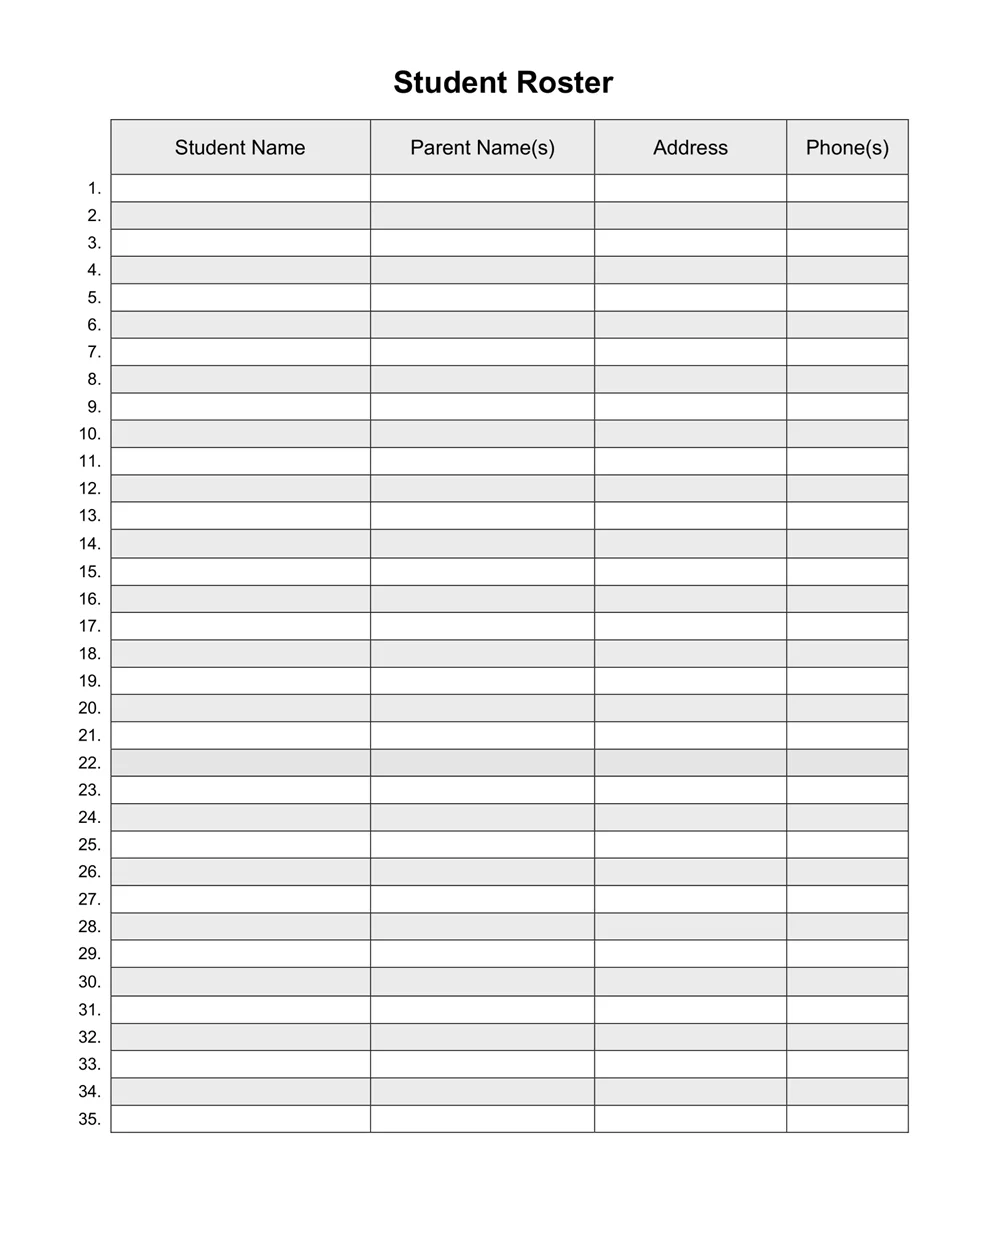 Student Roster Template PDF